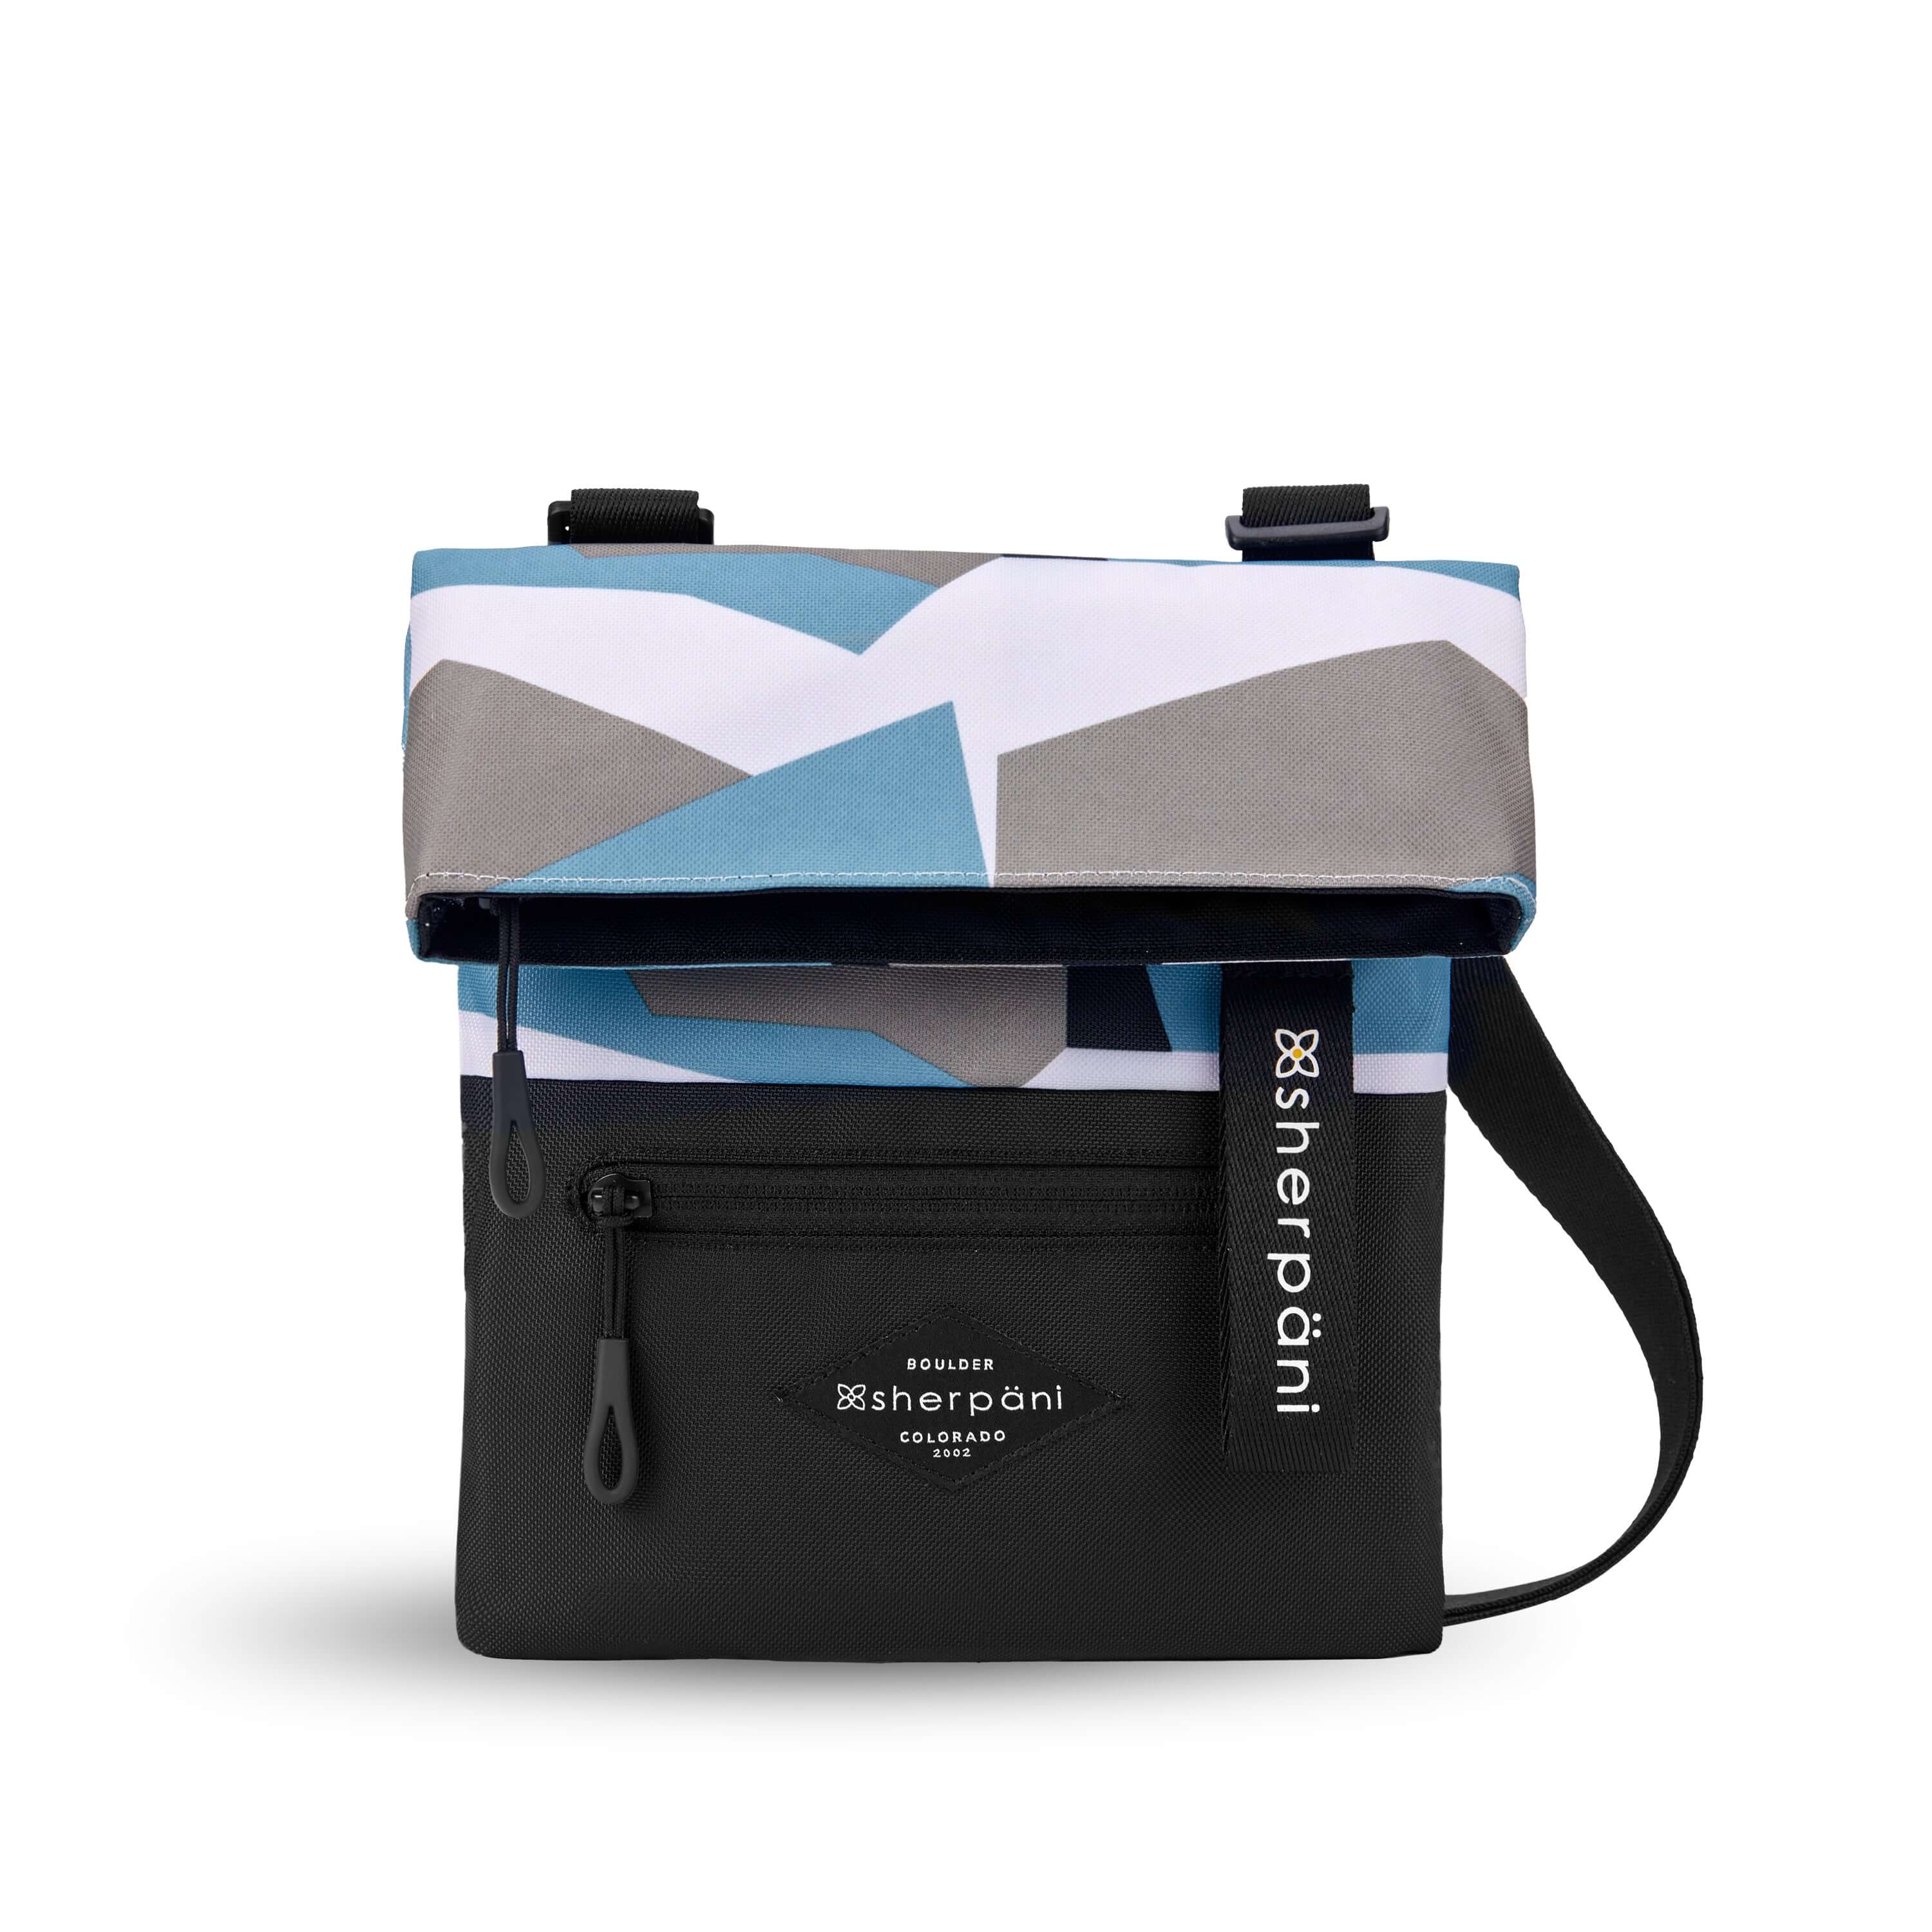 Flat front view of Sherpani crossbody, the Pica in Summer Camo. The bag is two toned: the top half is a camouflage pattern of light blue, gray and white and the bottom half is black. There is an external zipper pocket on the front panel. Easy pull zippers are accented in black. The top of the bag folds over creating a signature look. A branded Sherpani keychain is clipped to the upper right corner. The bag has an adjustable crossbody strap. 